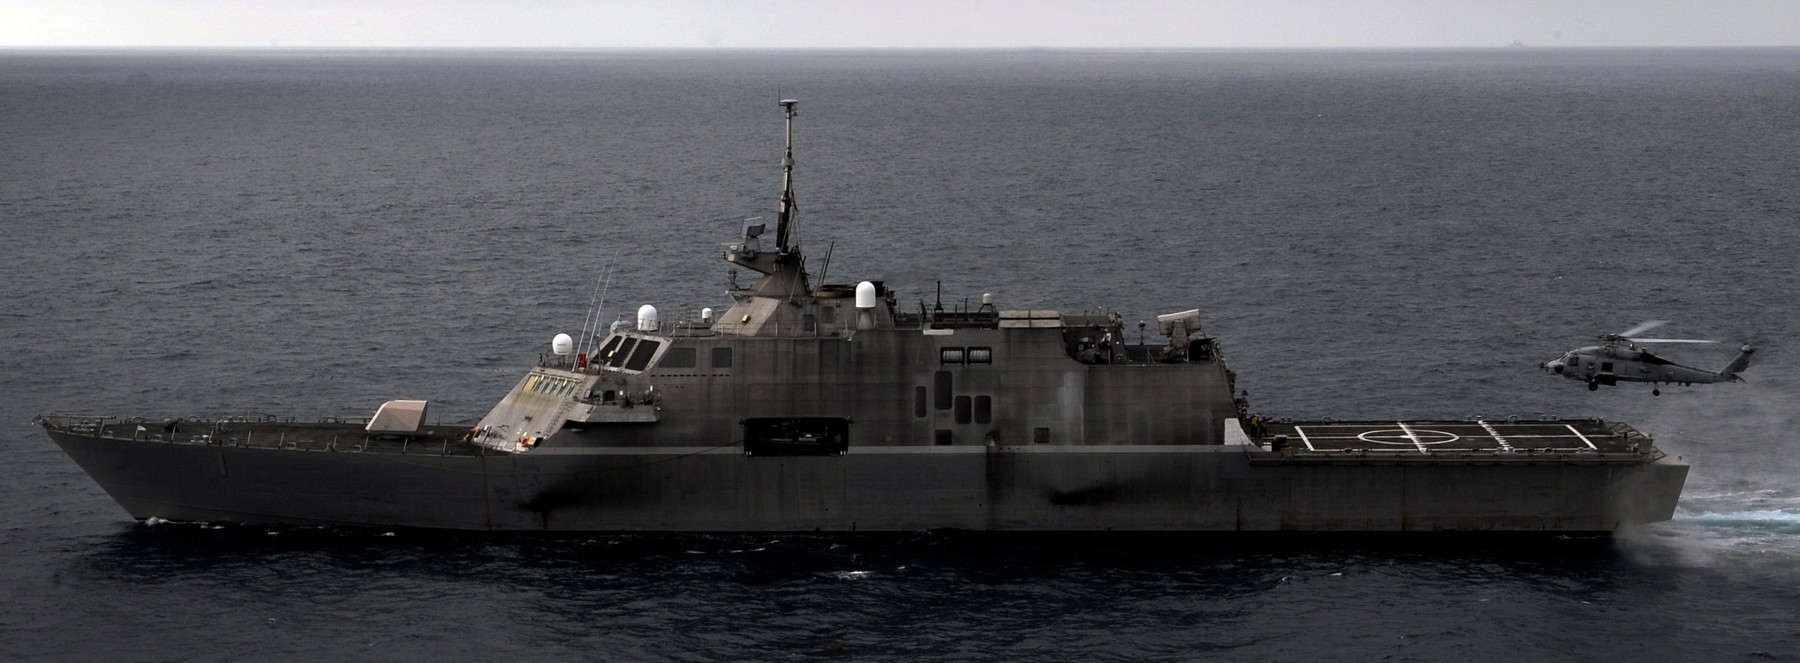 lcs-1 uss freedom class littoral combat ship us navy 65